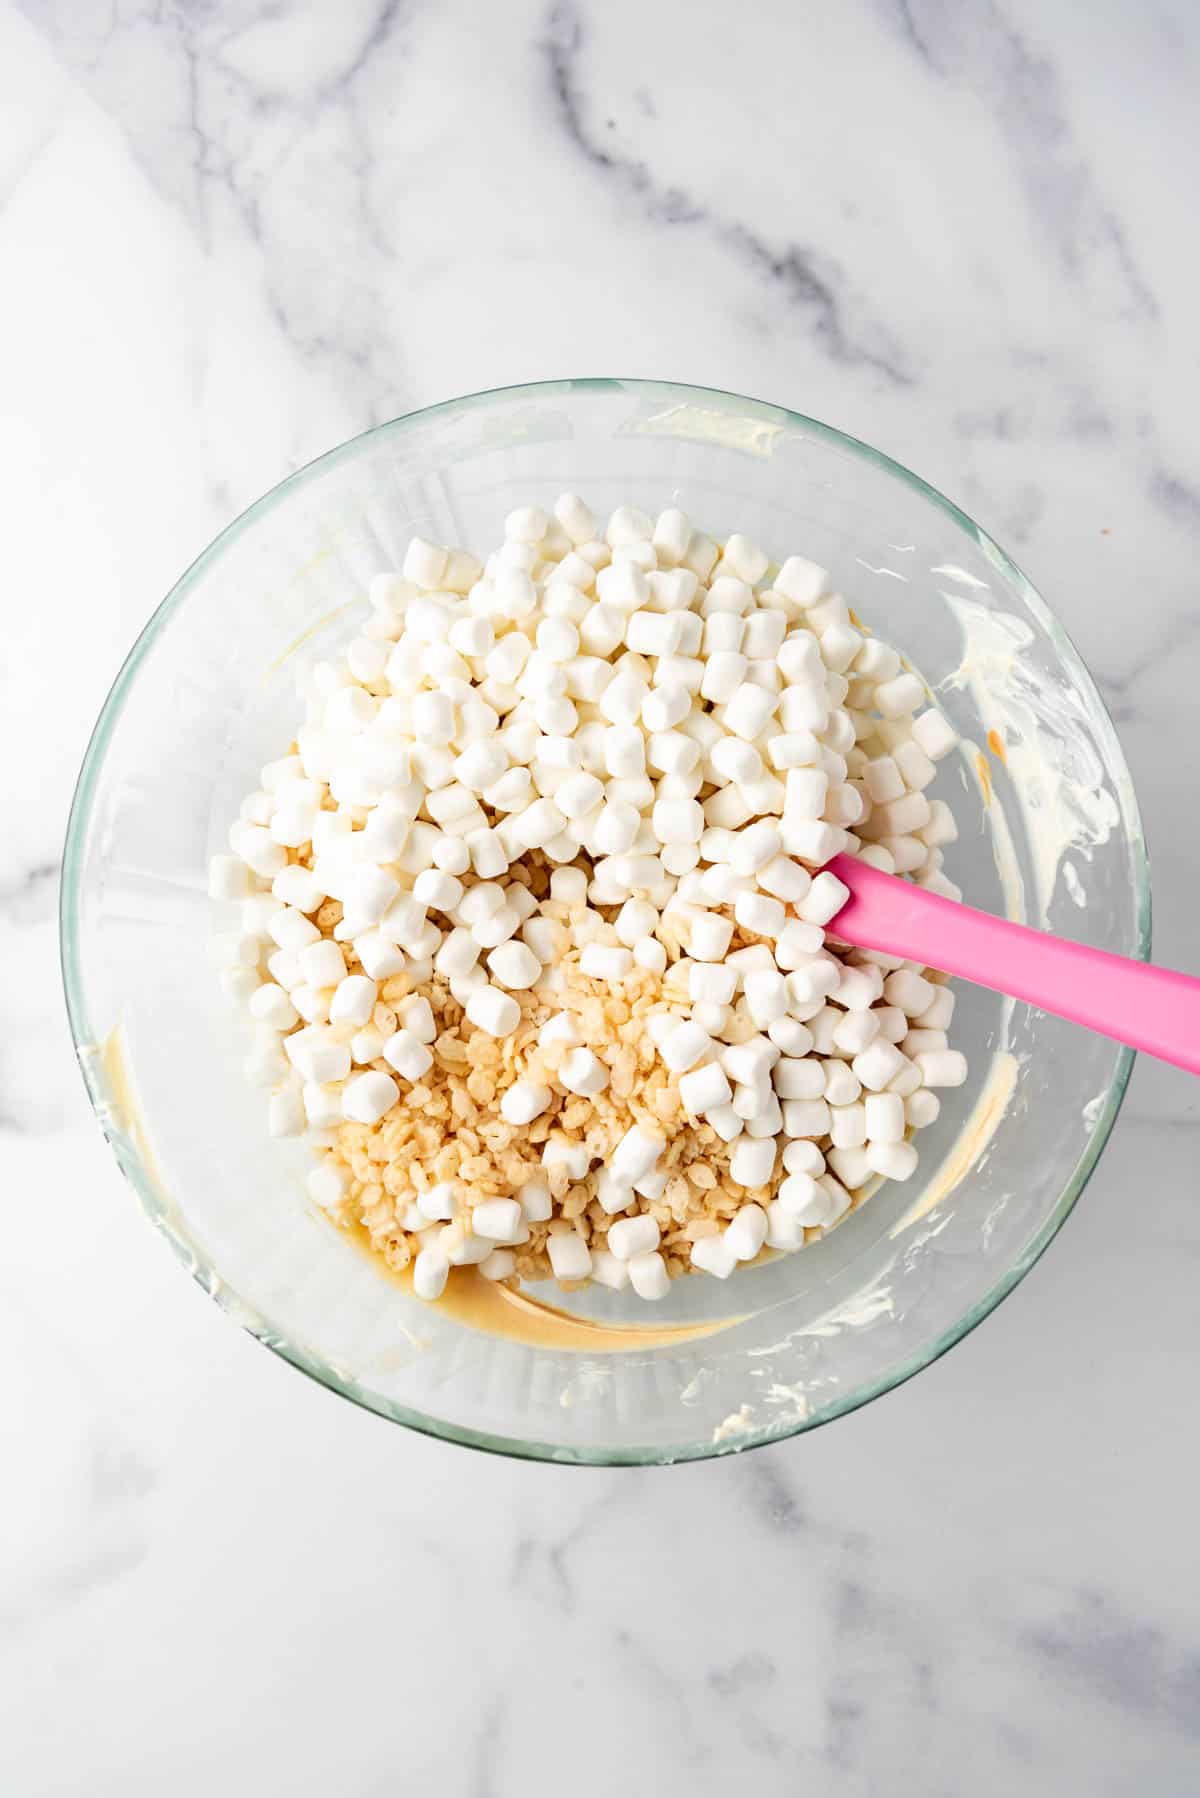 An image of mini marshmallows and rice krispies cereal being added to a mixing bowl of melted white chocolate and peanut butter.